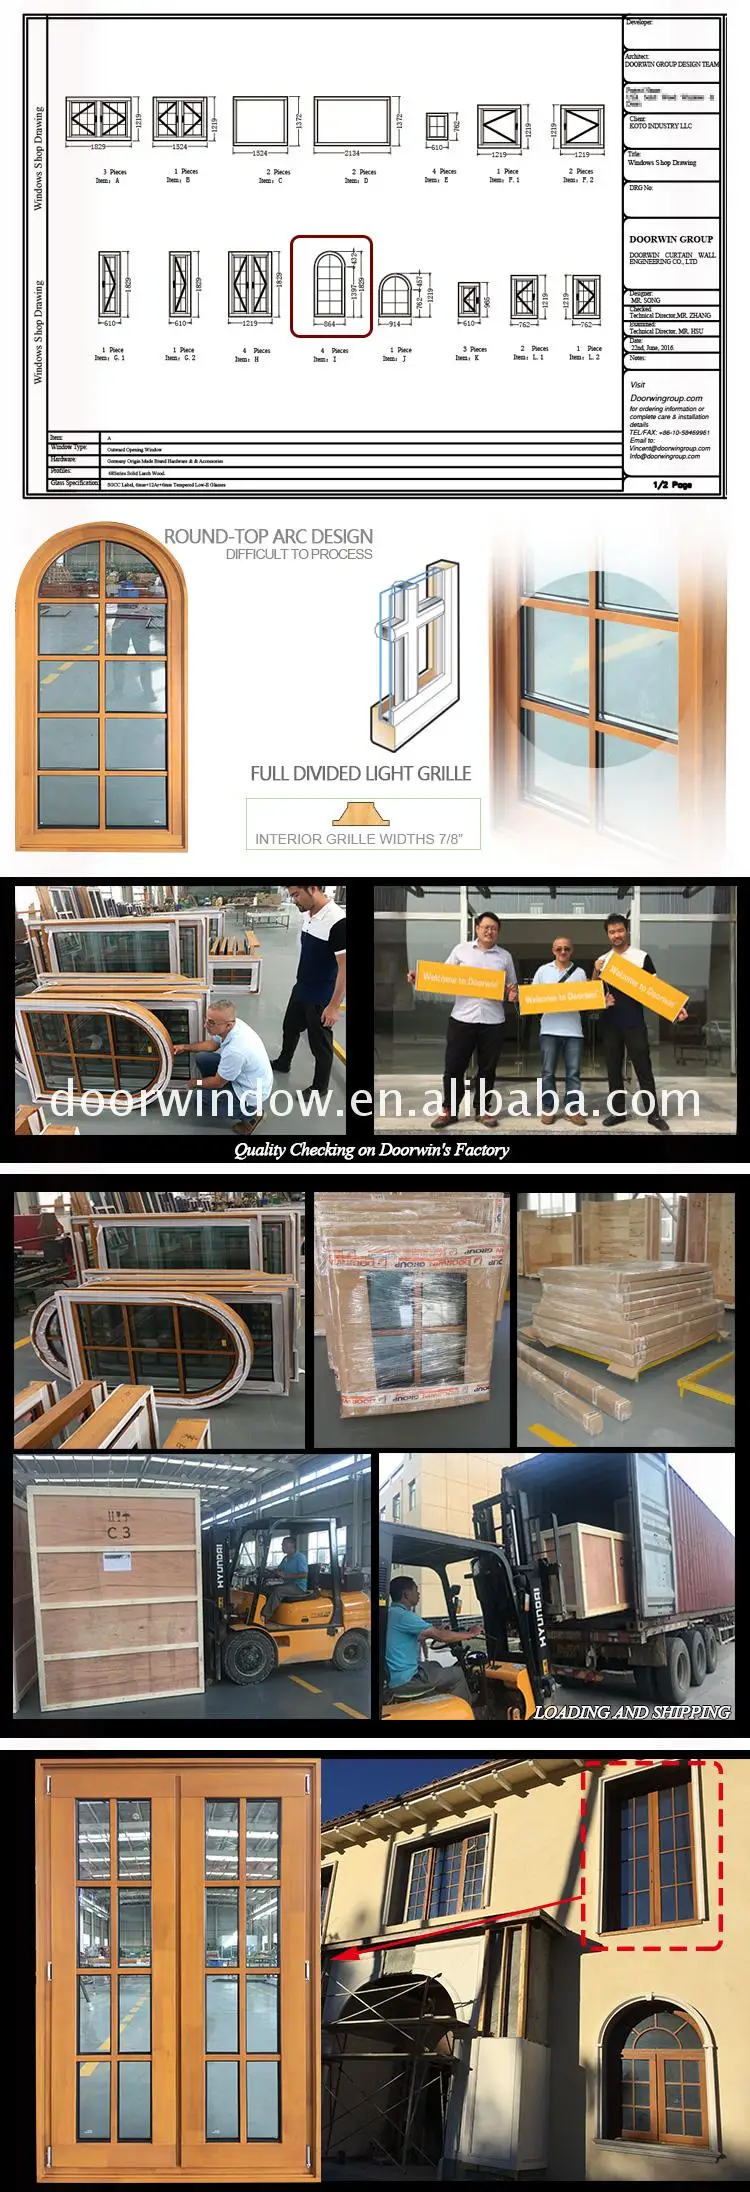 Windows with built in blinds grill design window and mosquito net